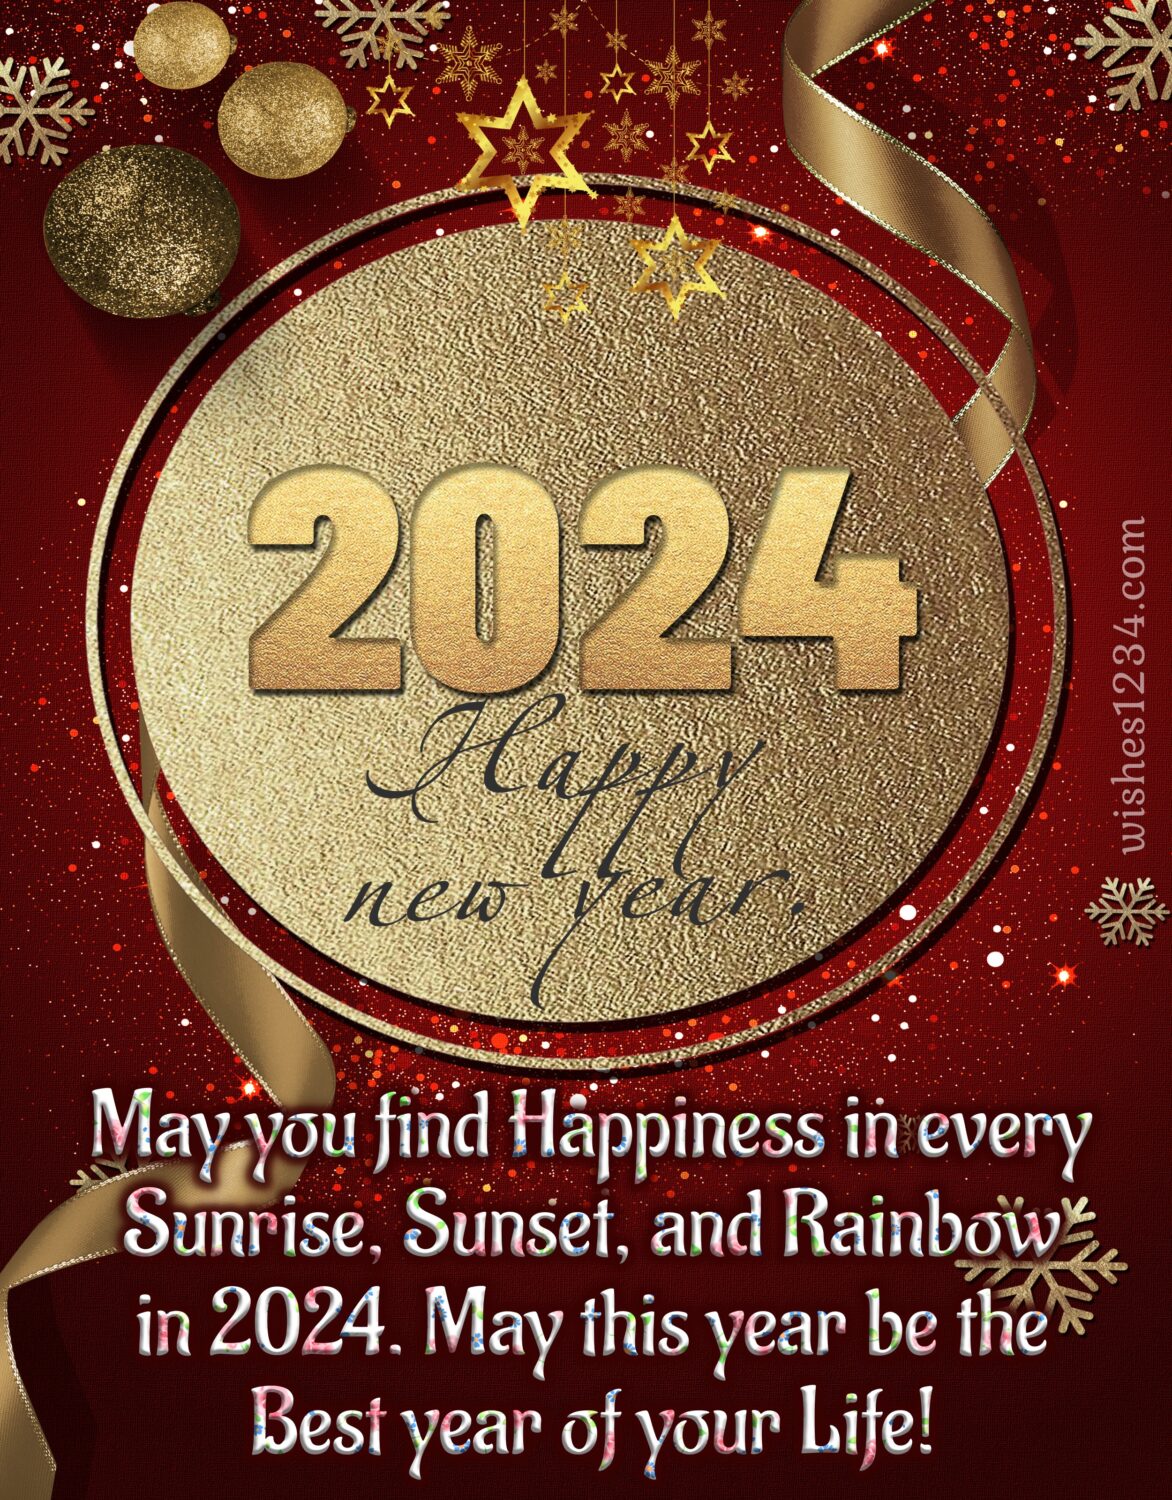 Happy New Year 2024: Top 5 Images to Spread Joy & Good Vibes